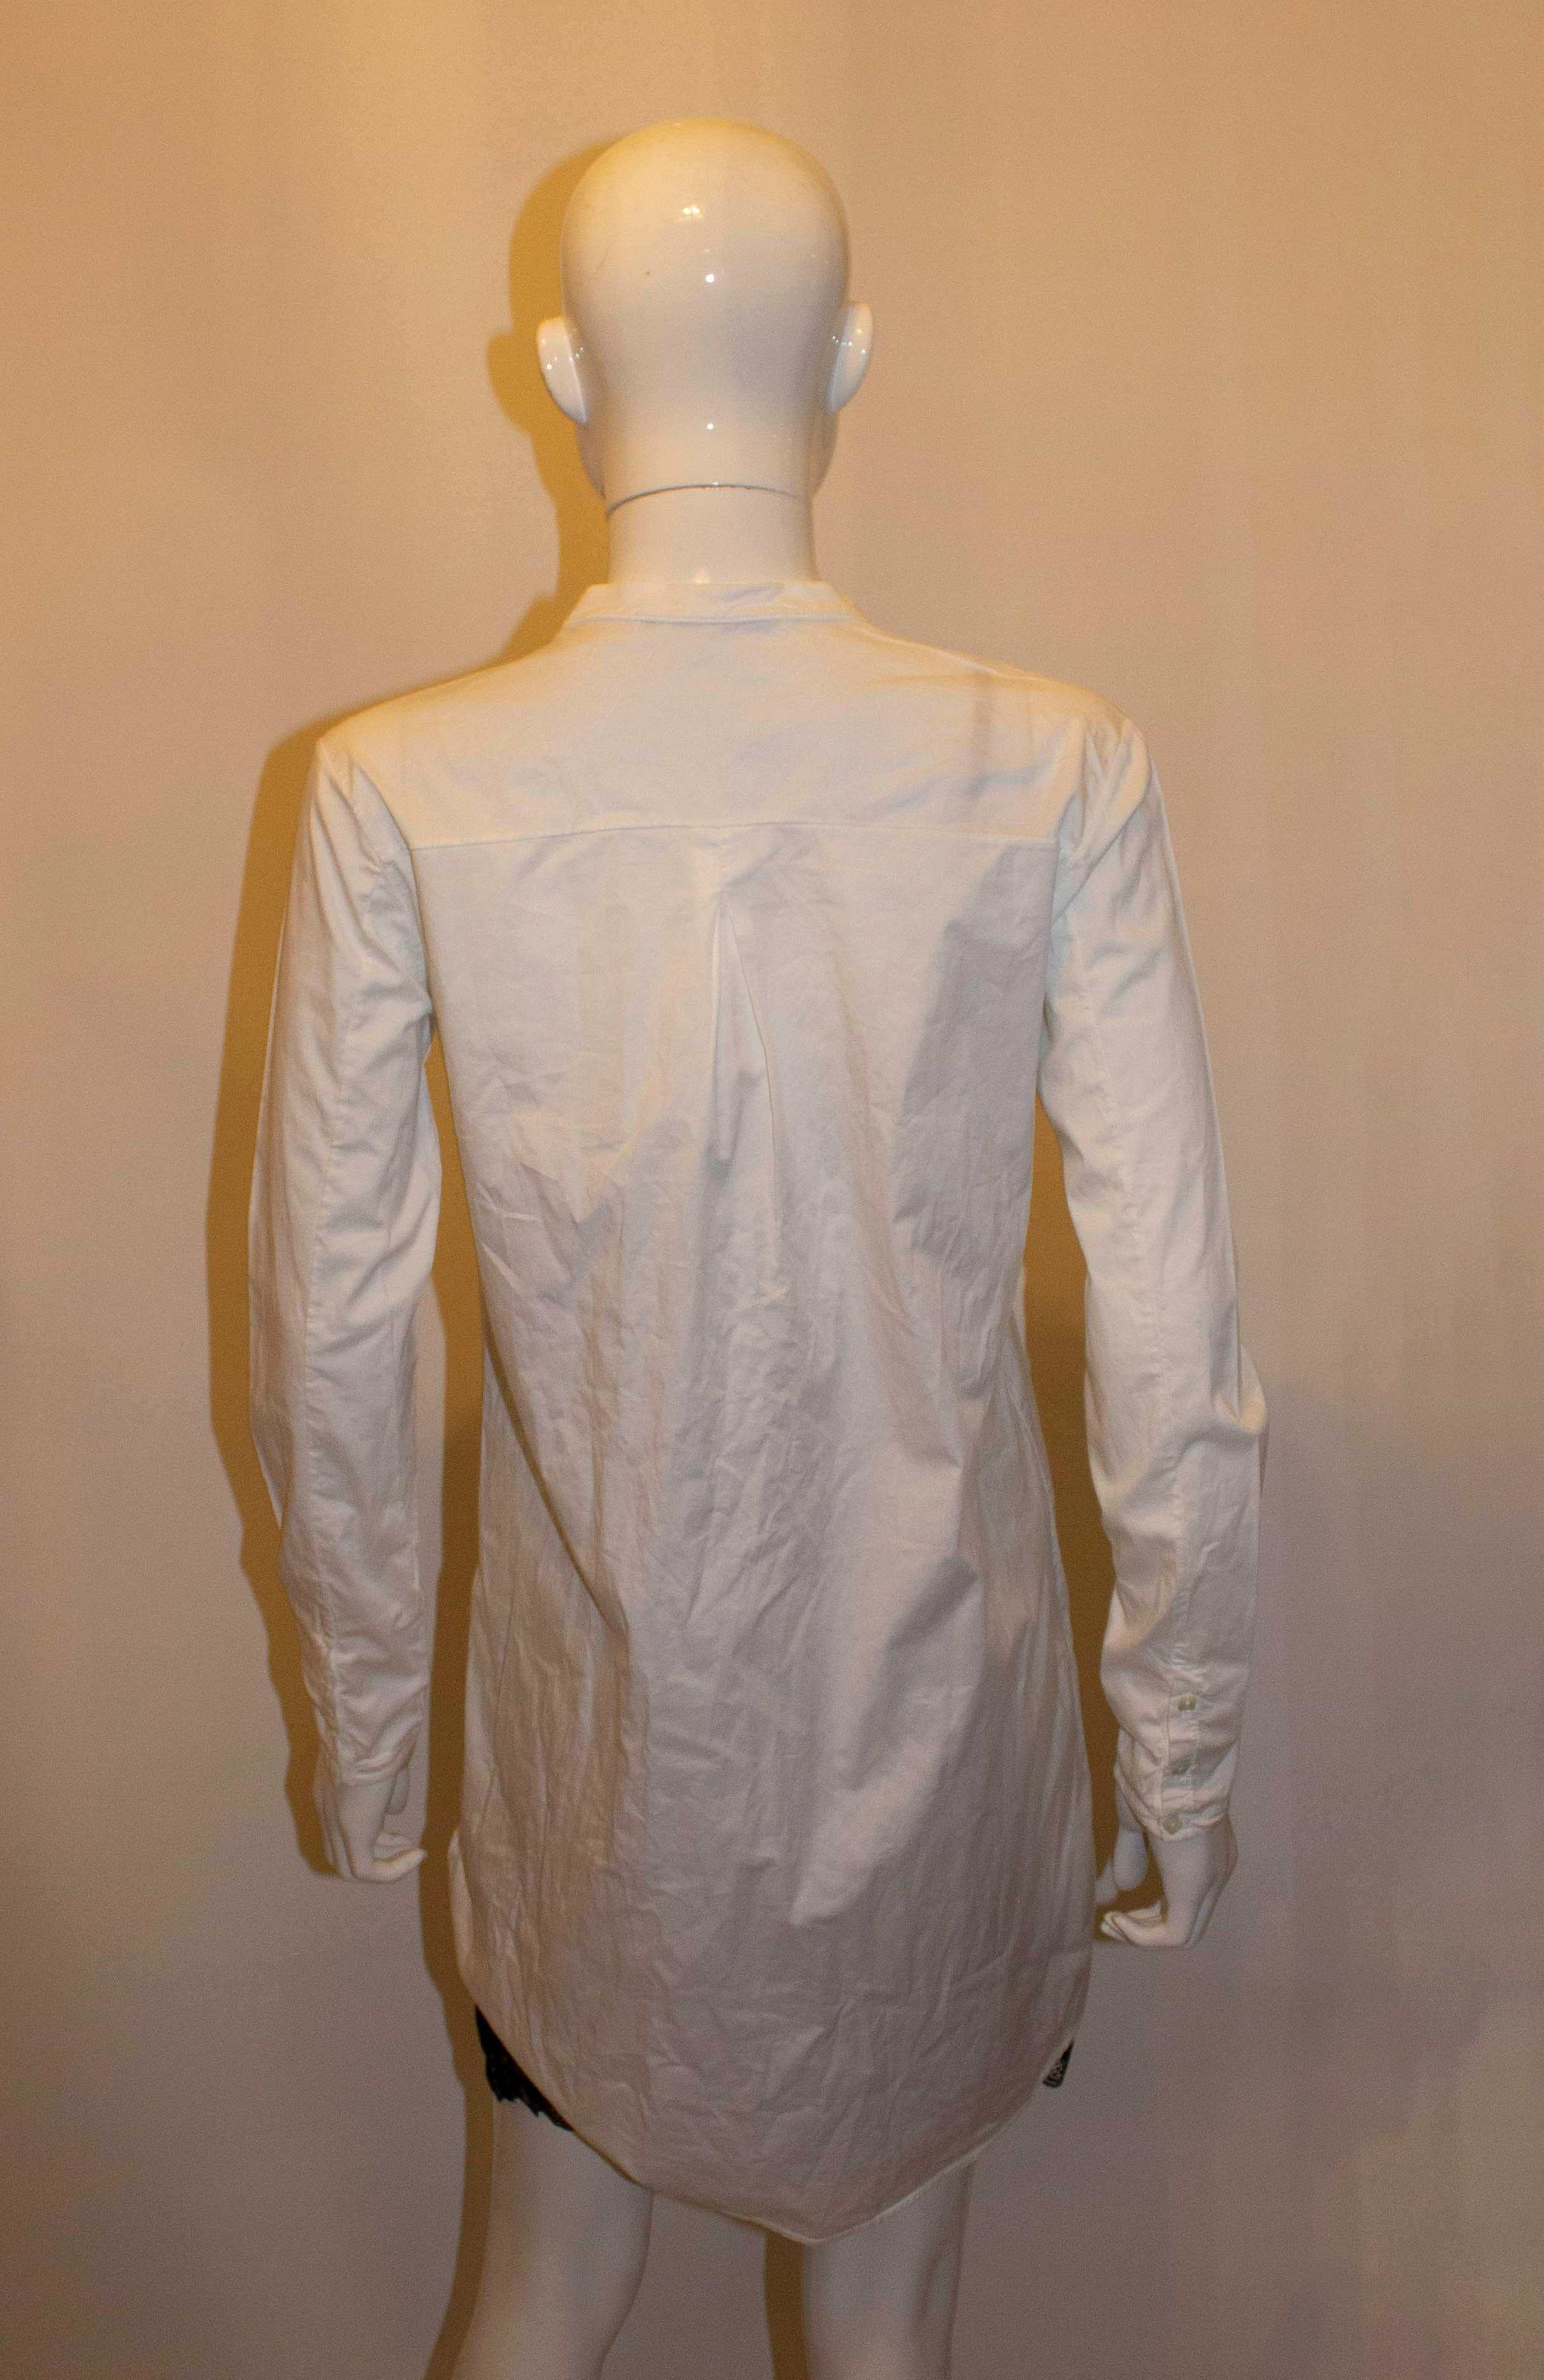 A chic and easy to wear white cotton shirt by Transit Par Such. The shirt is collarless with an interesting neckline,  and tapered sleeves with nice button detail. Made in Italy Size 2
Measurements: Bust 36'', length 43''
